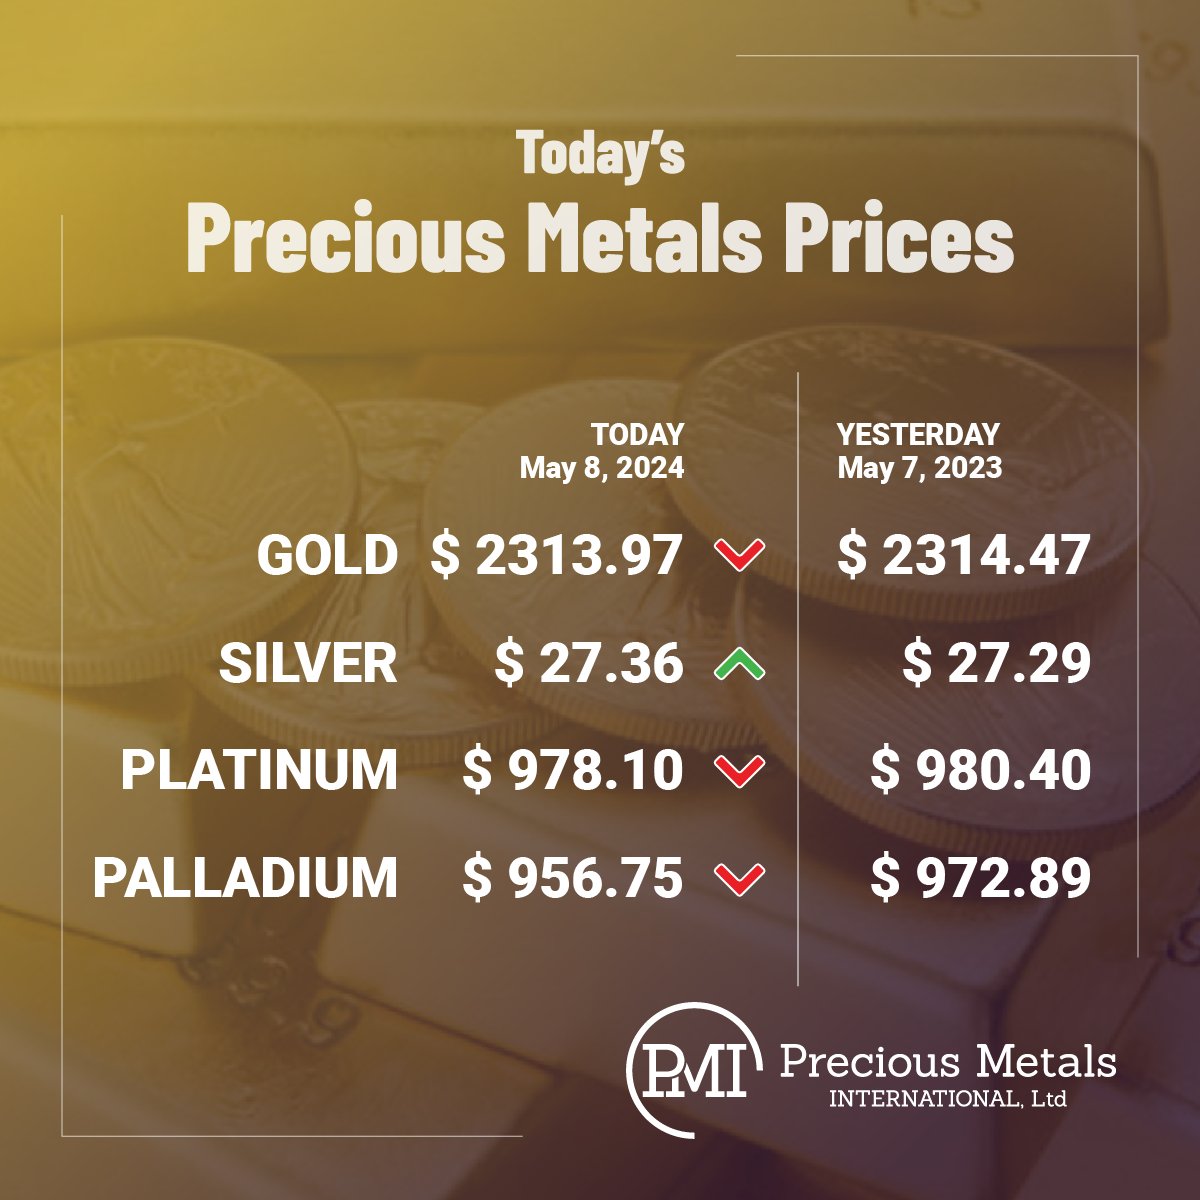 Today’s precious metals prices as of Wednesday, May 8th, 2024.
·
·
·
#BullionPMI #Gold #Silver #Platinum #Palladium #PreciousMetals #Prices #BuyGold #BuySilver #InGoldWeTrust 🥇💛🟡🌕🟨🪙⬜️🔘◻️📈✨🤯👍🏼🔥